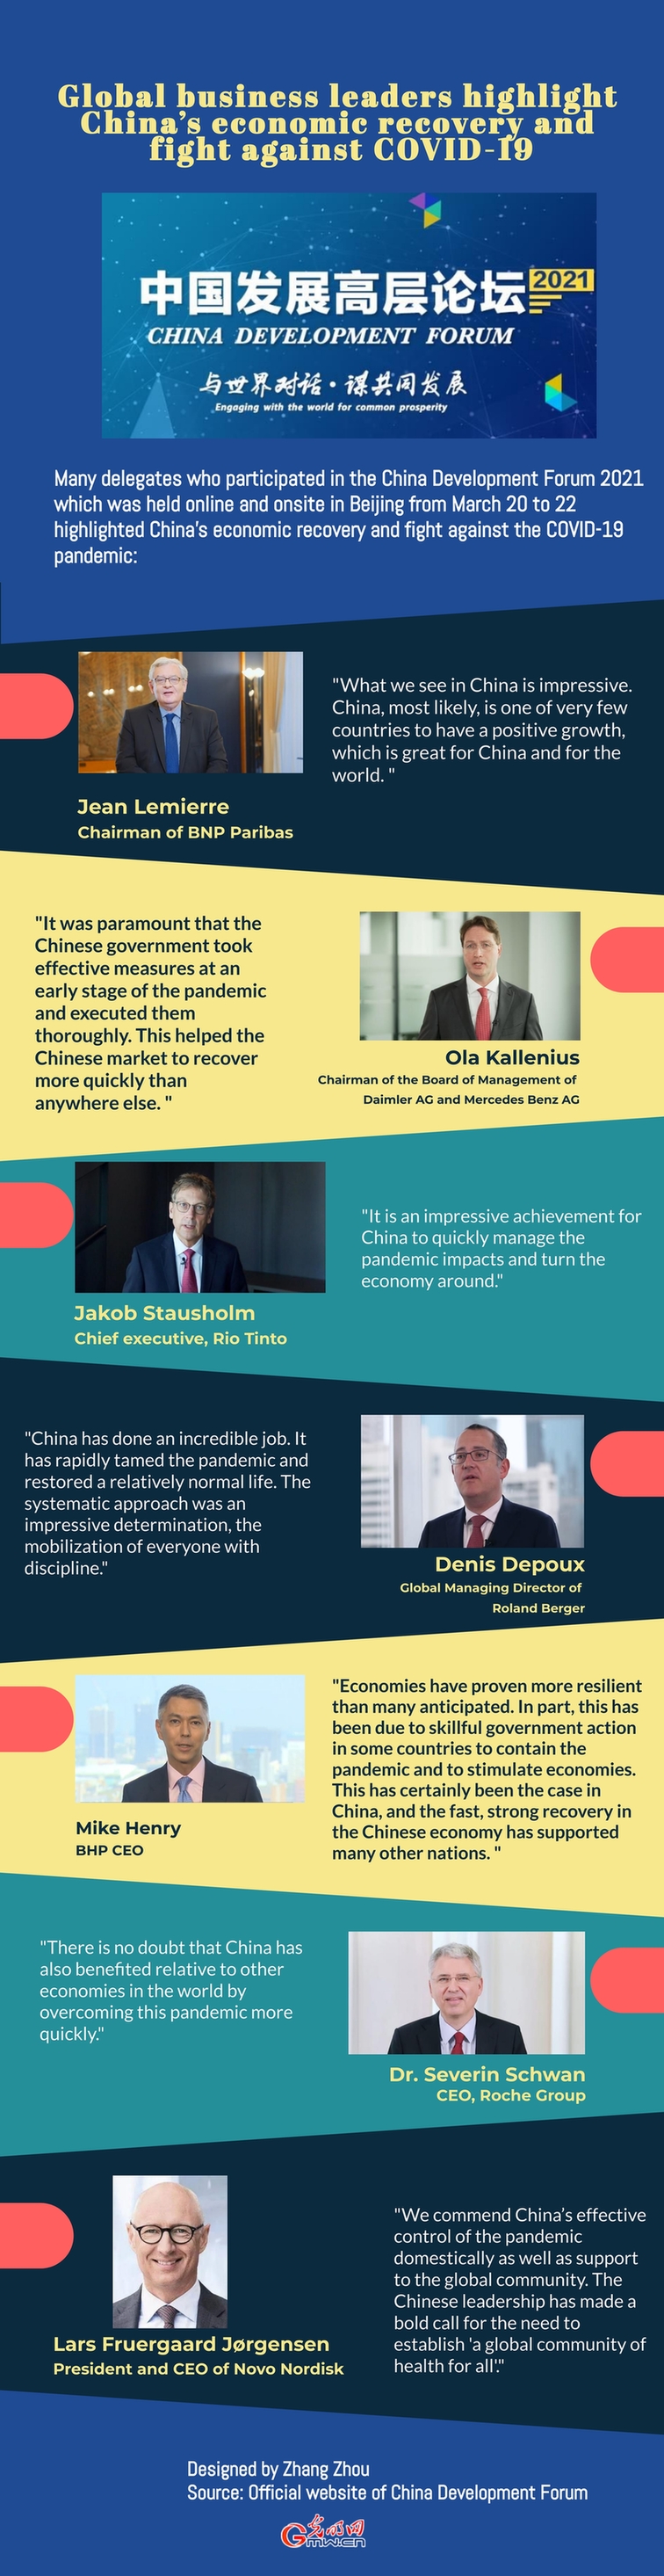 Infographic: Global business leaders highlight China’s economic recovery and fight against COVID-19